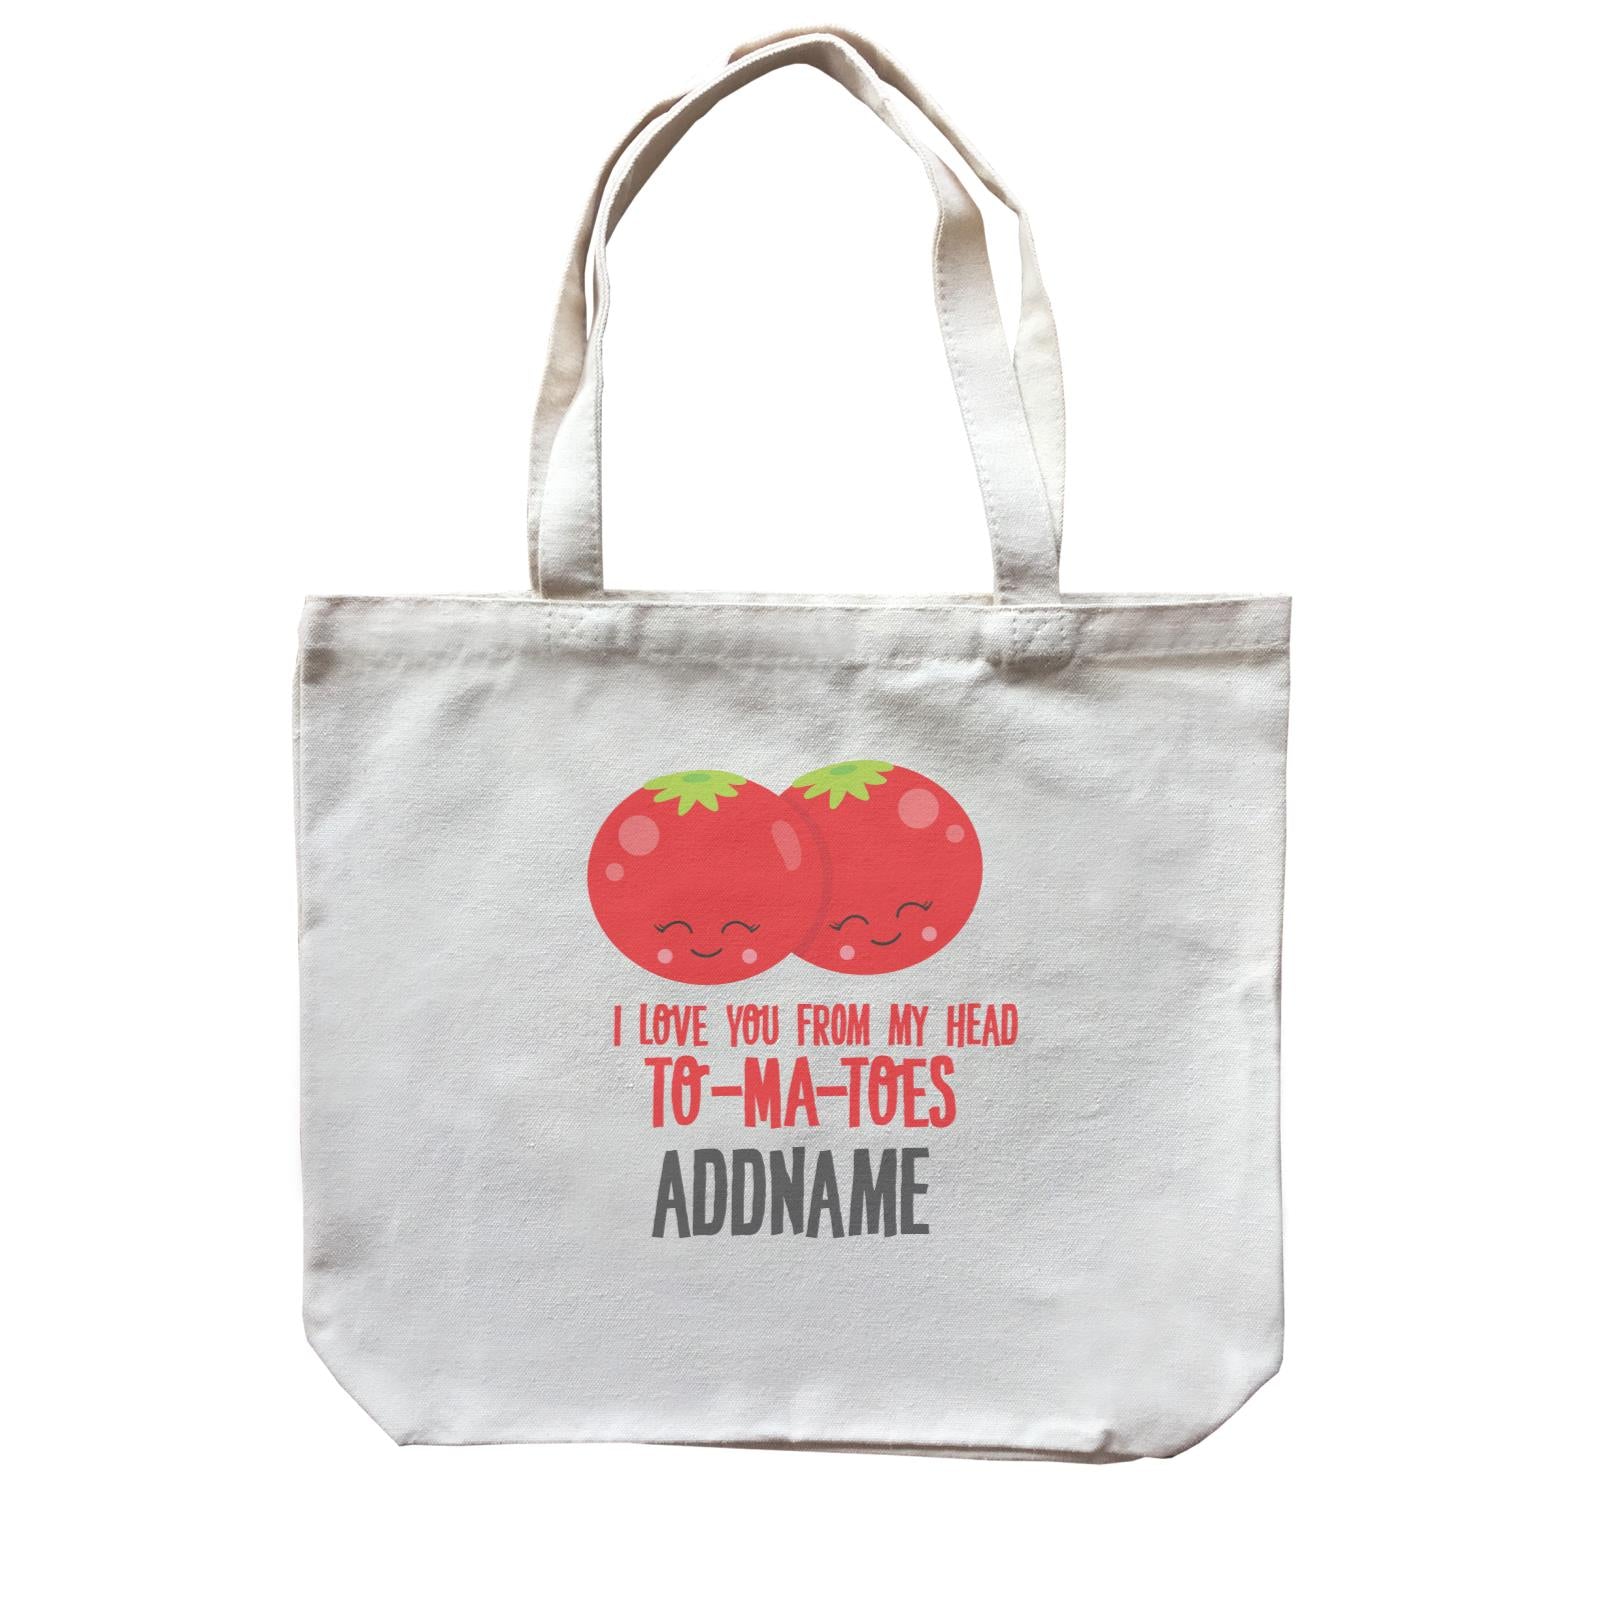 Love Food Puns I Love You From My Head TOMATOES Addname Canvas Bag